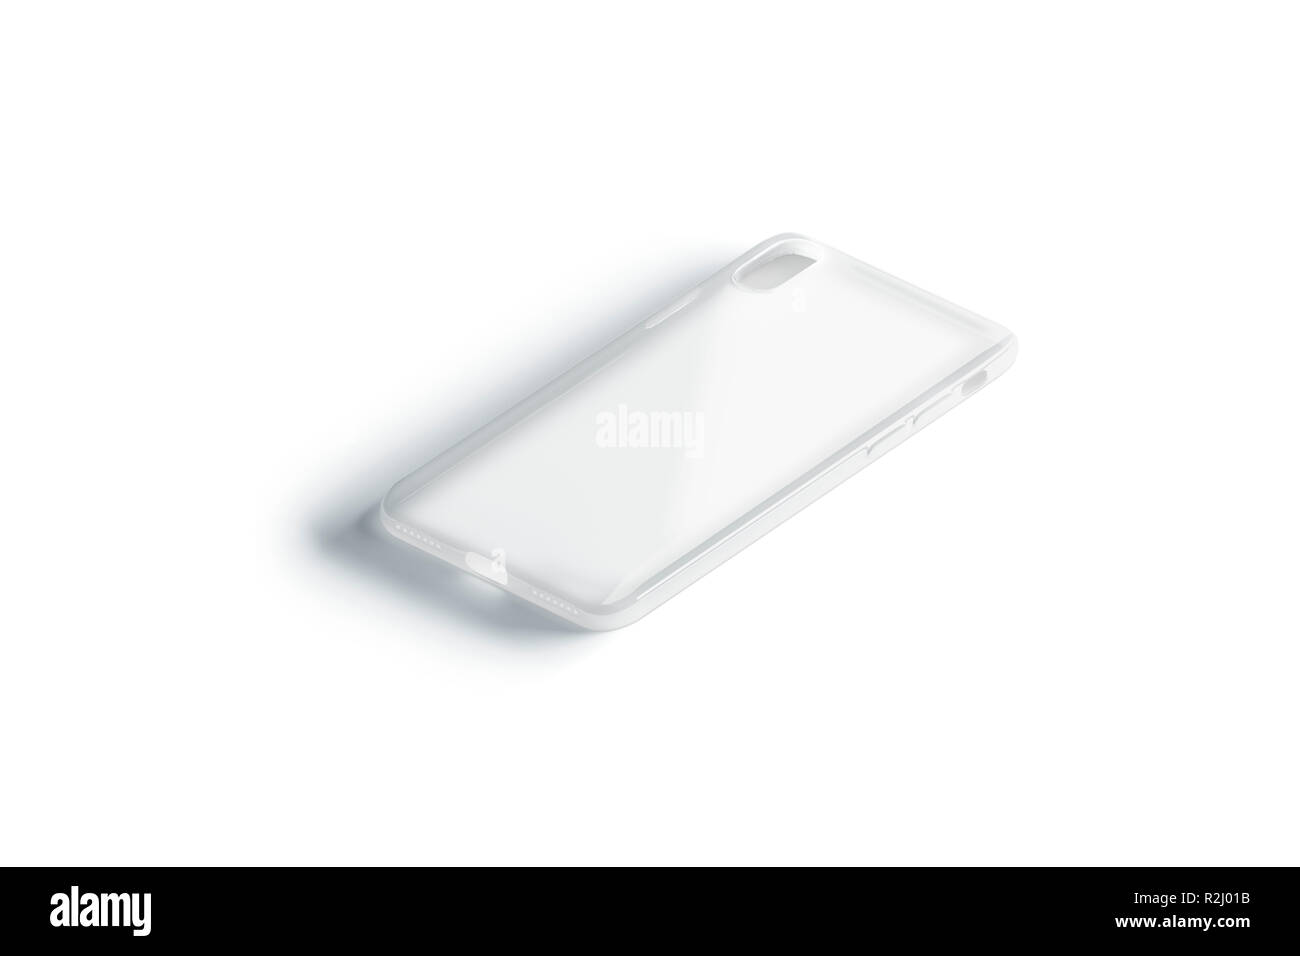 iphone clear case template